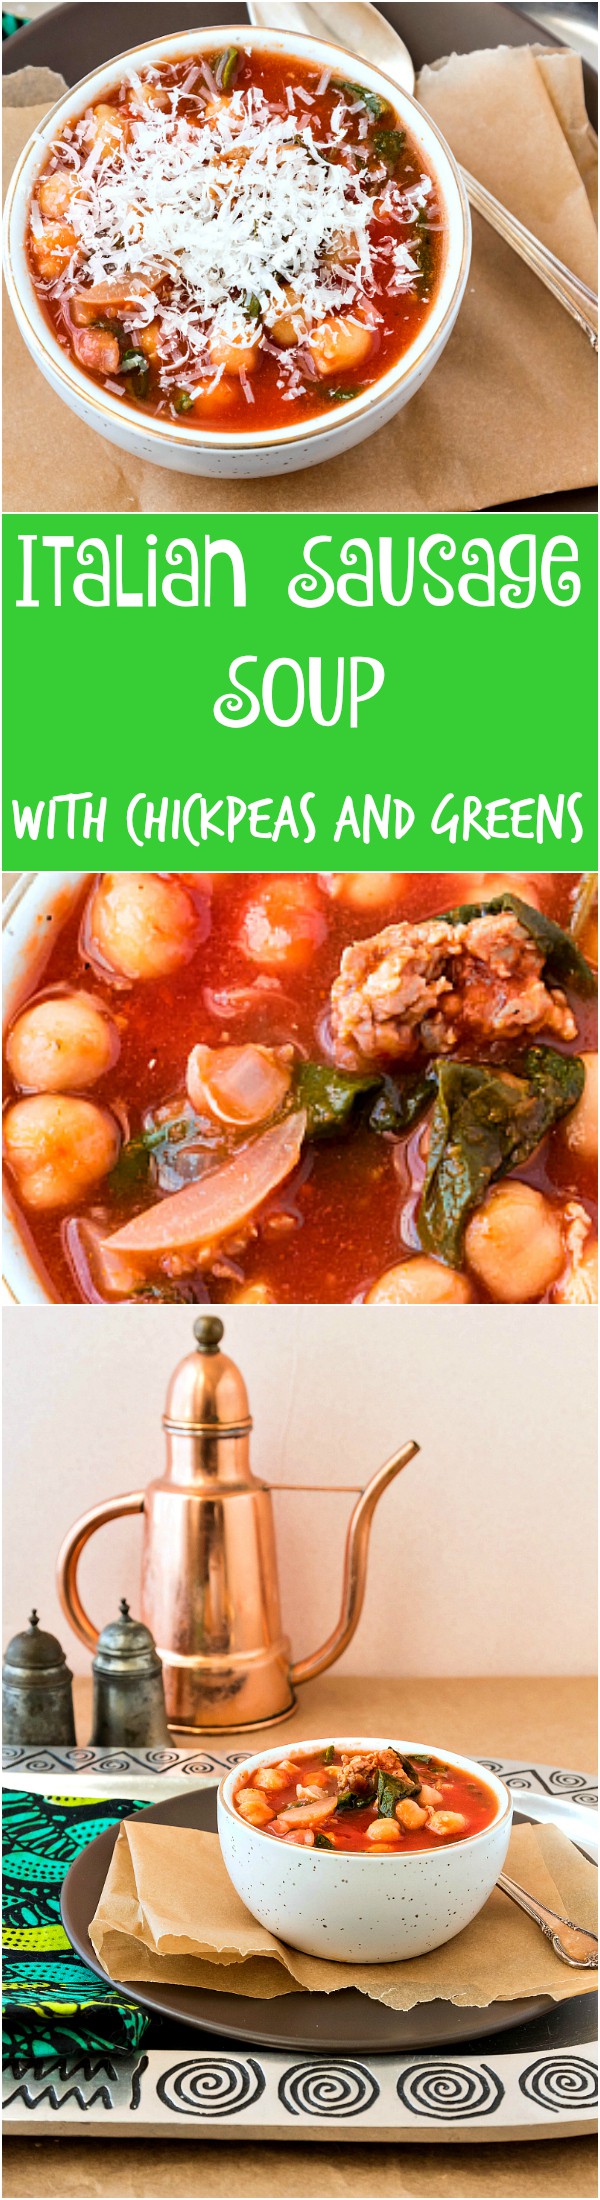 A collage of images for Italian sausage soup with chickpeas and greens.